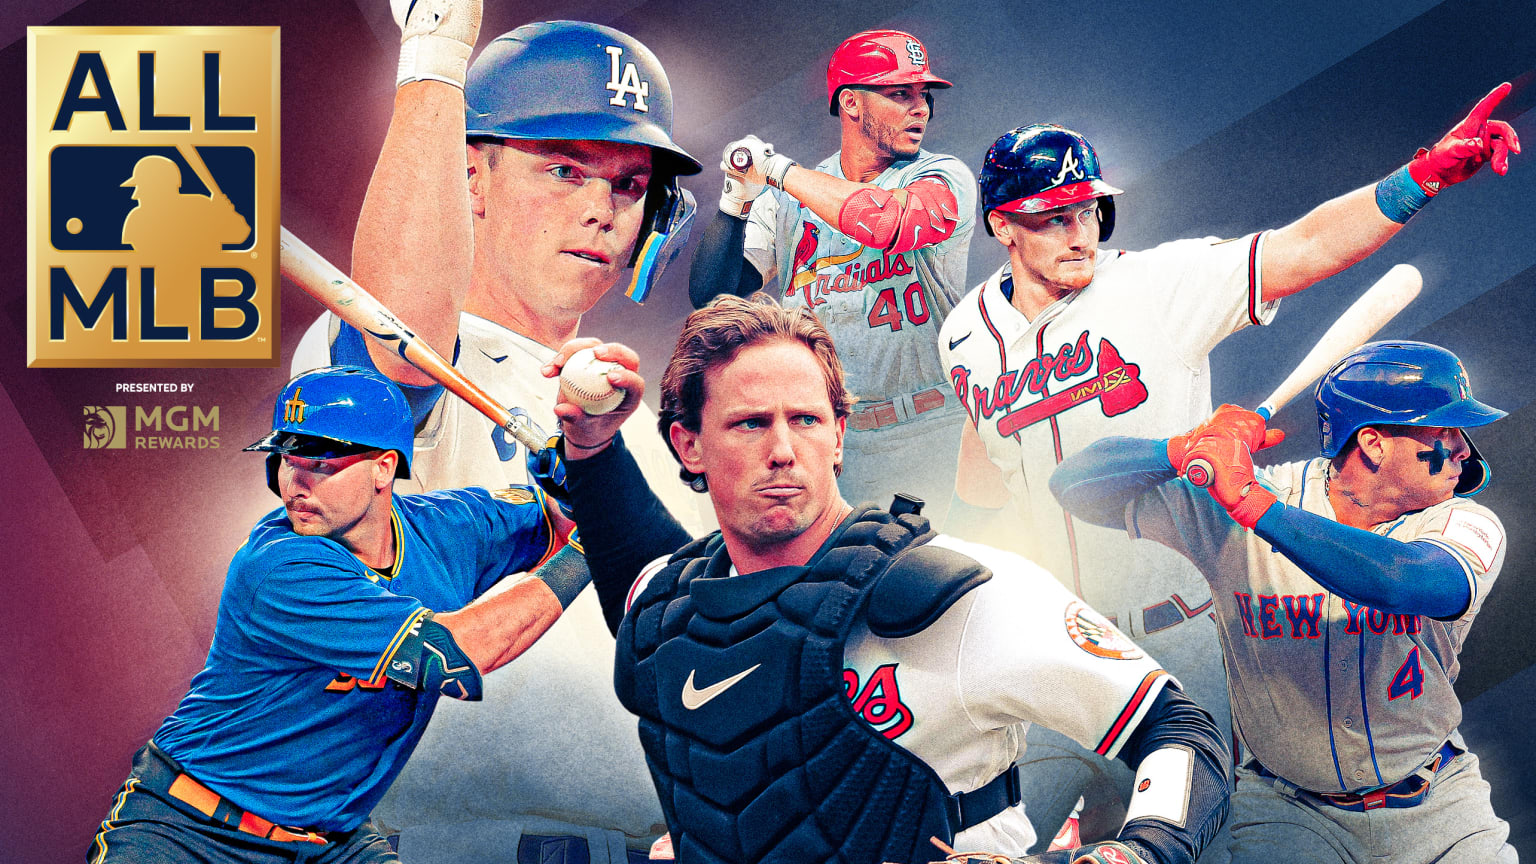 A montage shows six catchers and the All-MLB logo